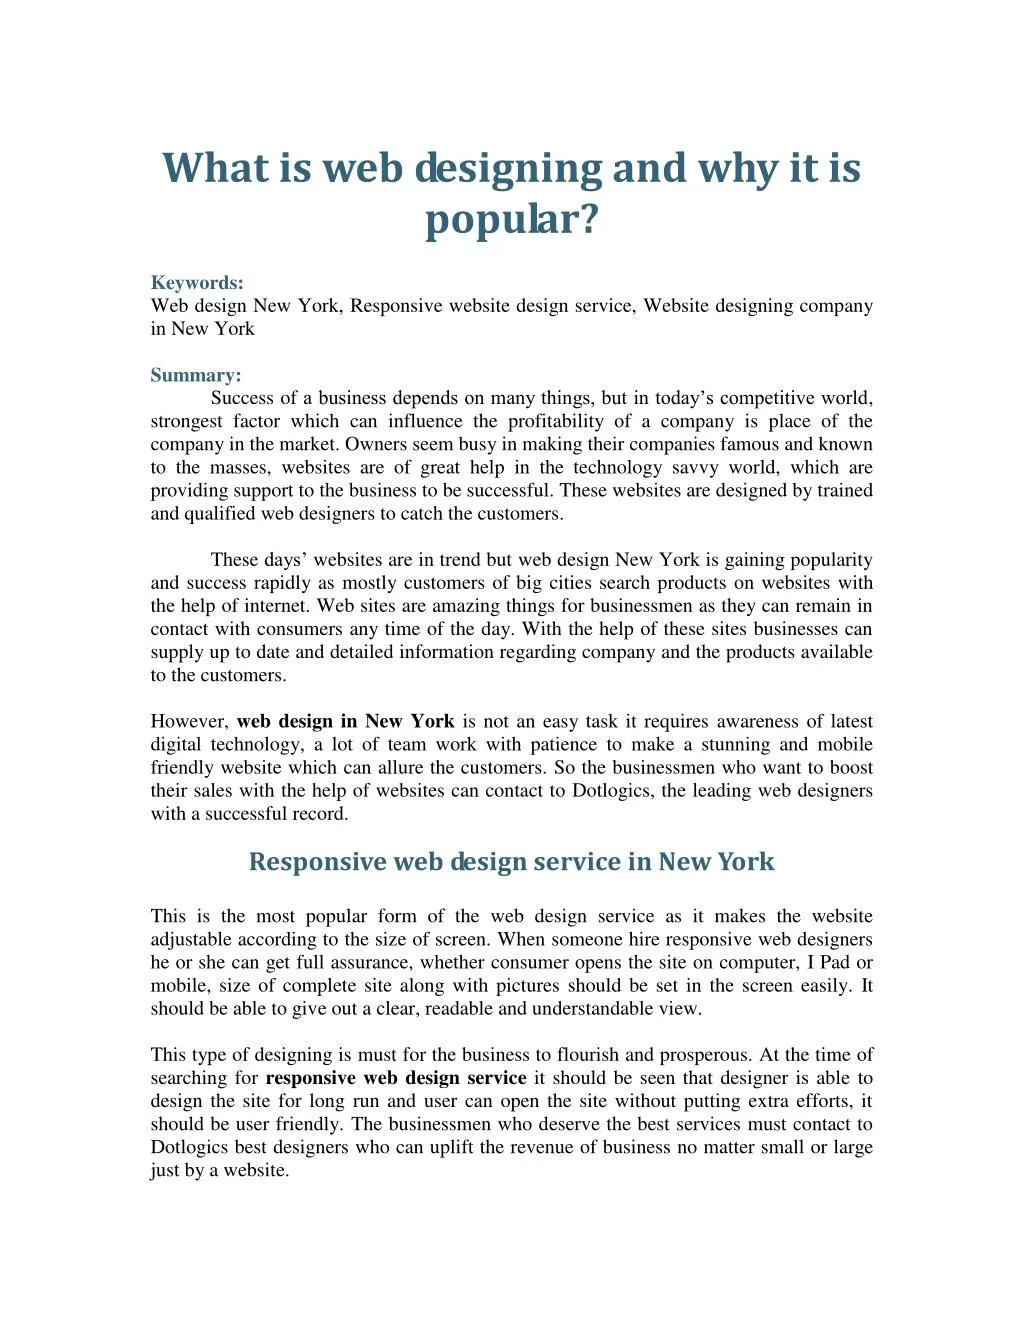 what is web designing and why it is popular